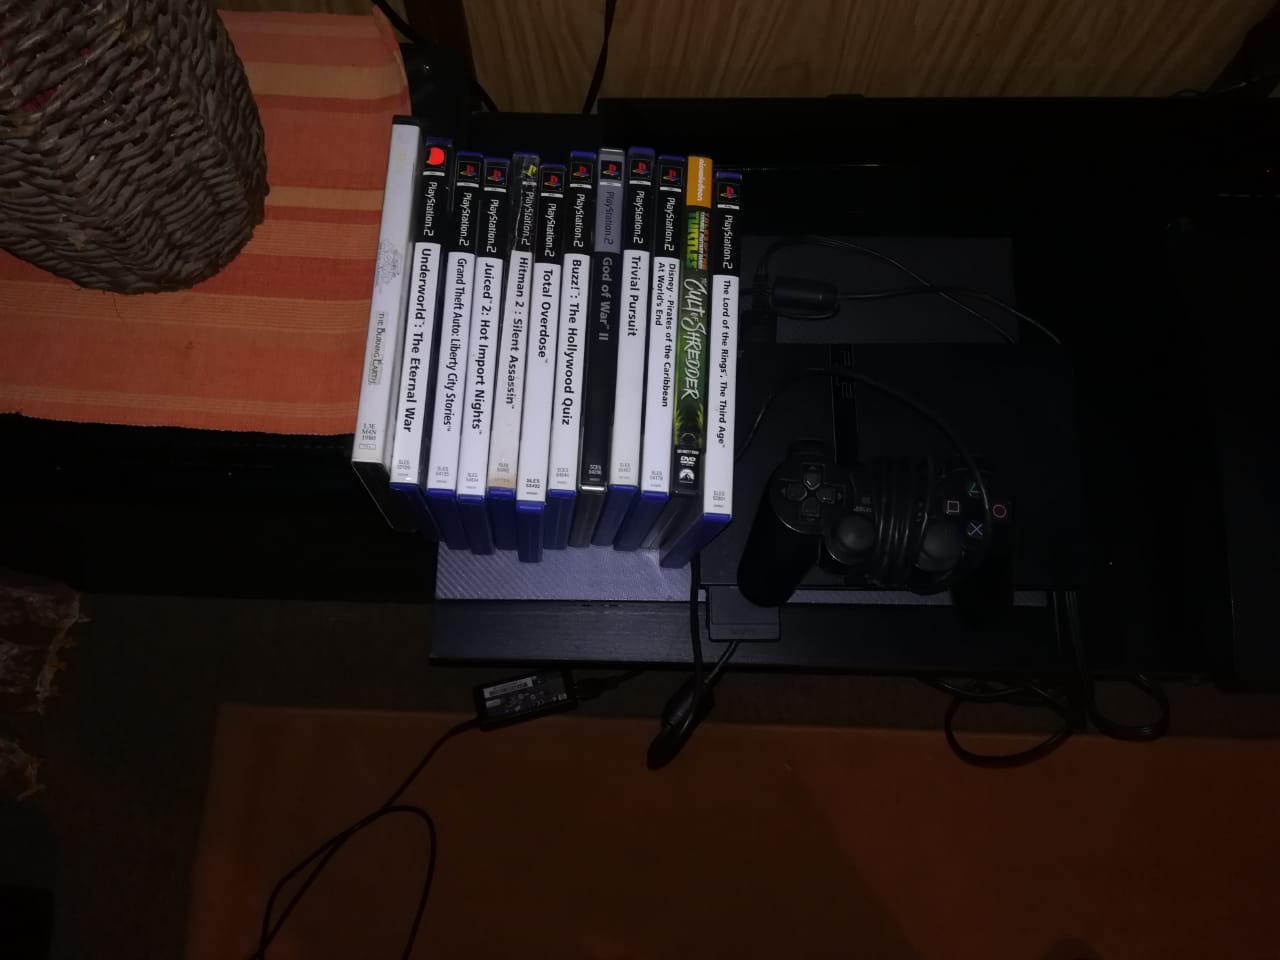 Playstation 2 and 3 with games